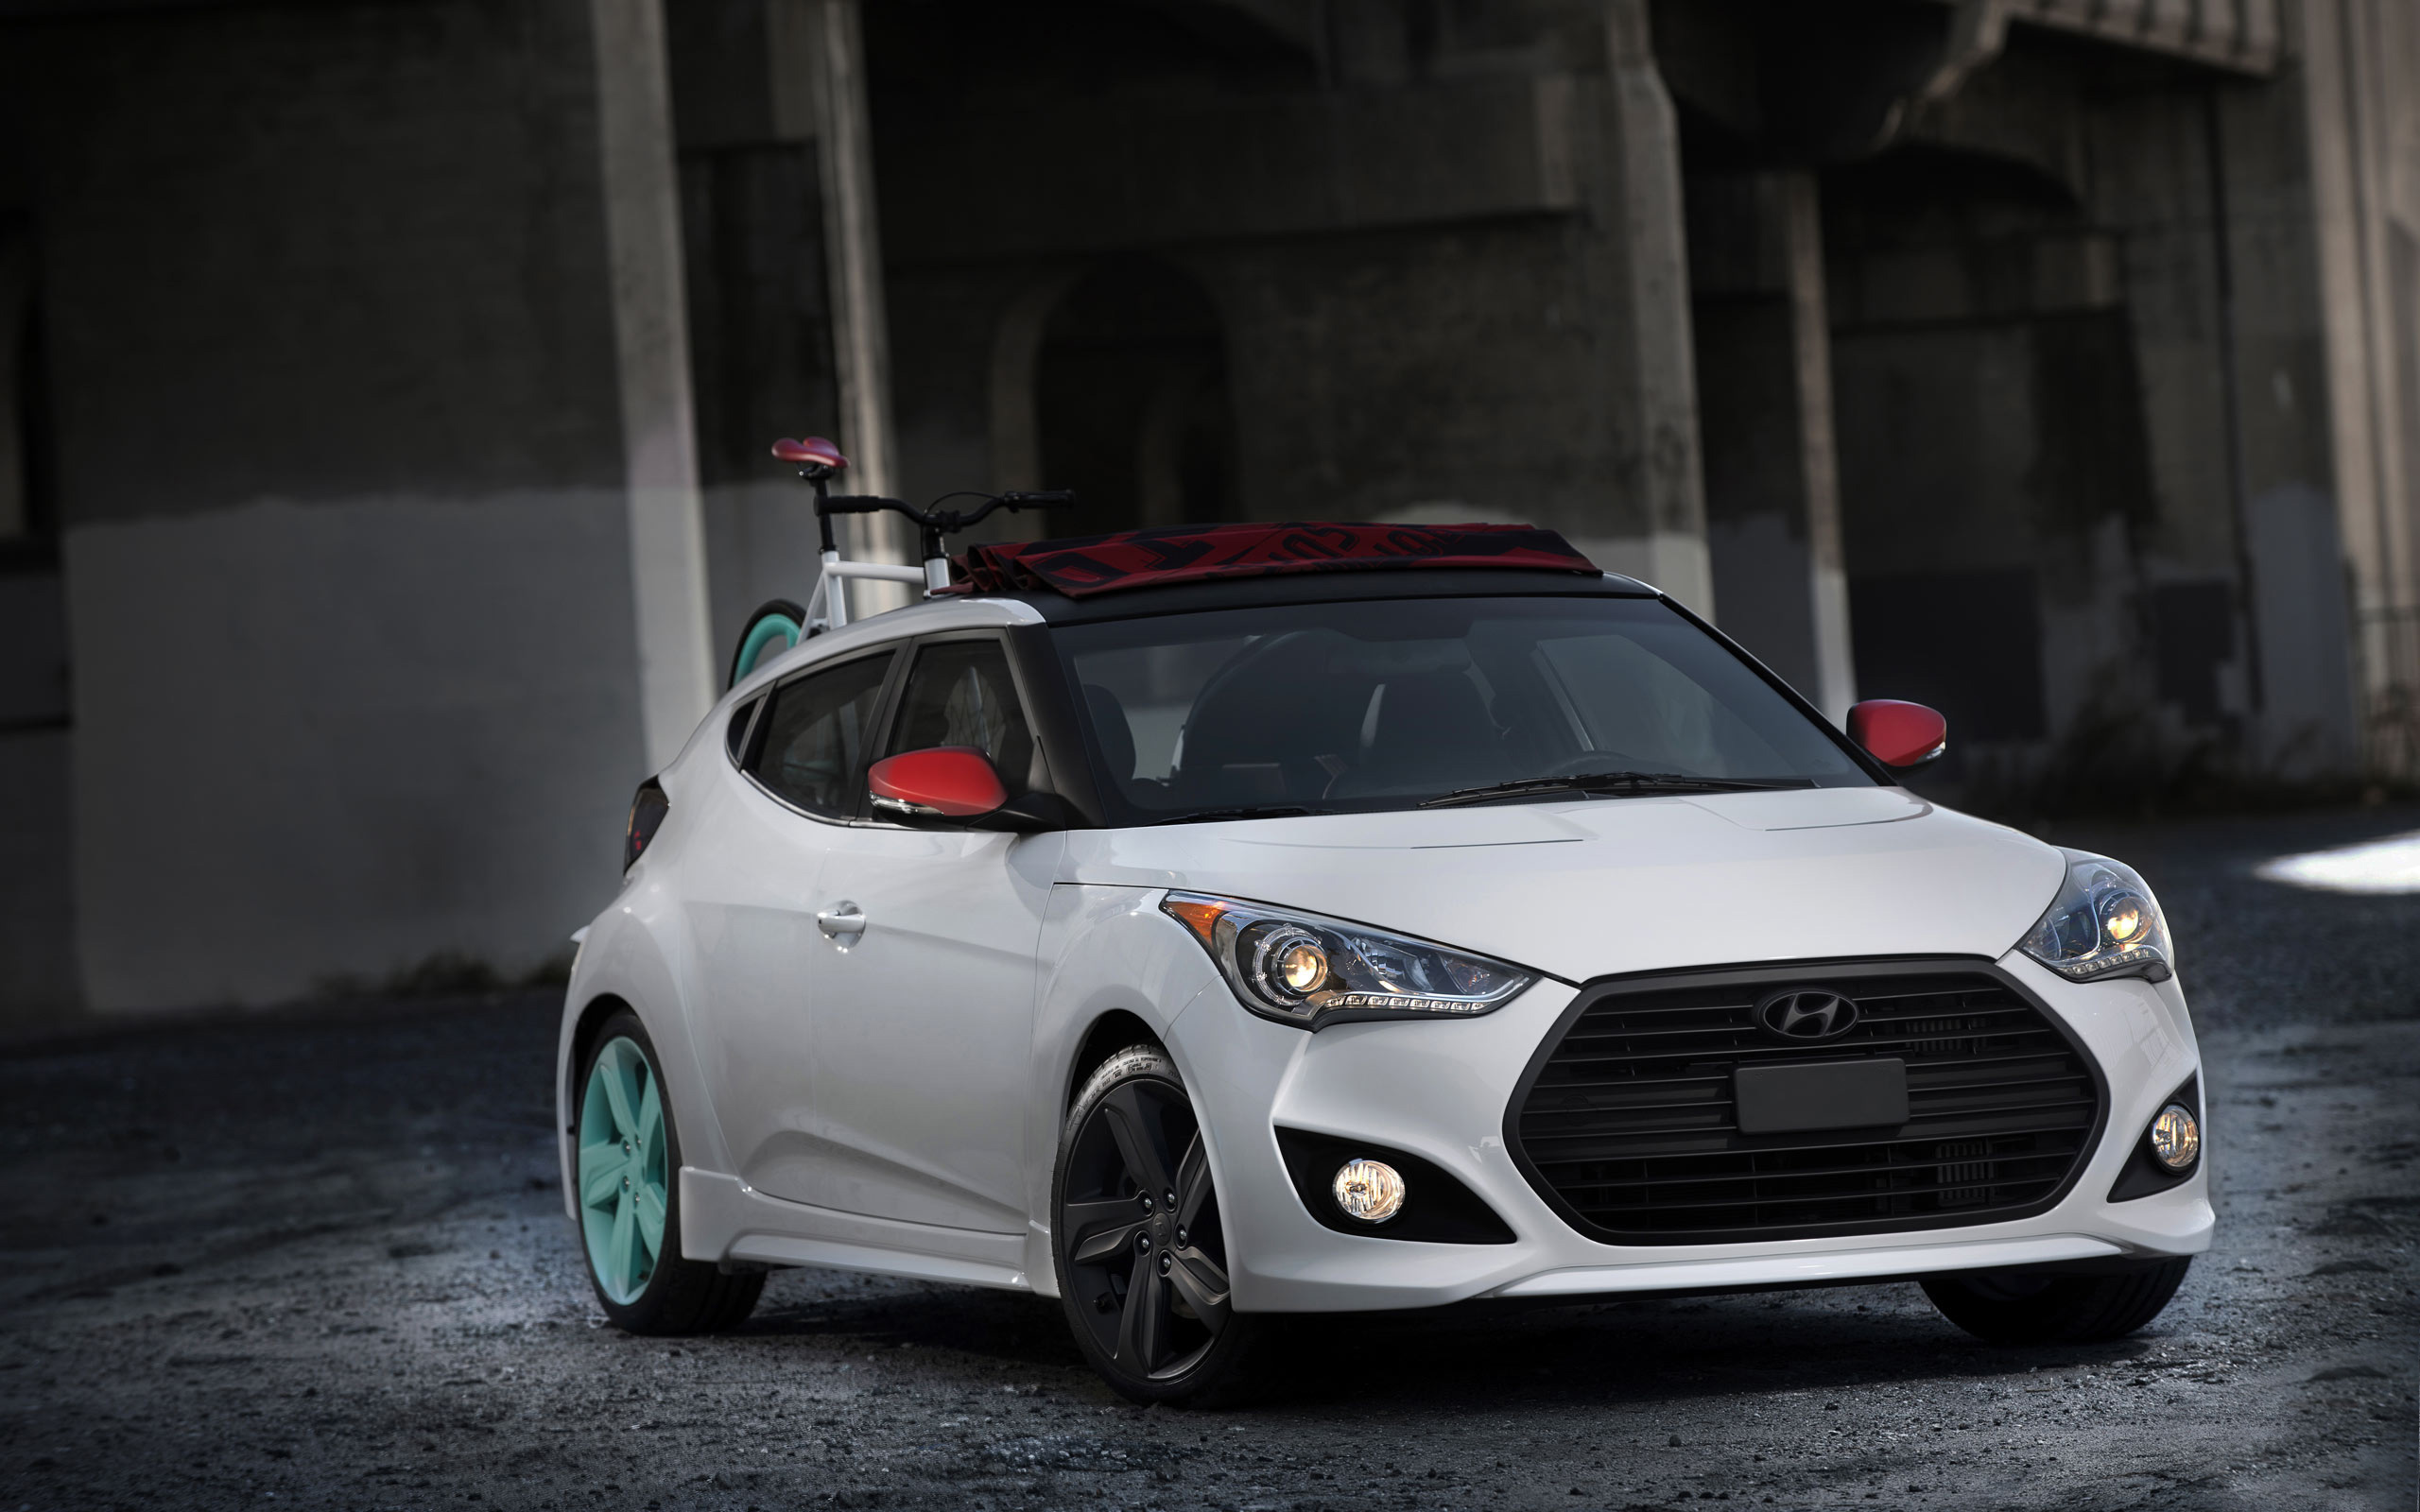 2013 Hyundai Veloster C3 Roll Top Conceptrelated Car Wallpapers Wallpaper Cars Wallpaper Better